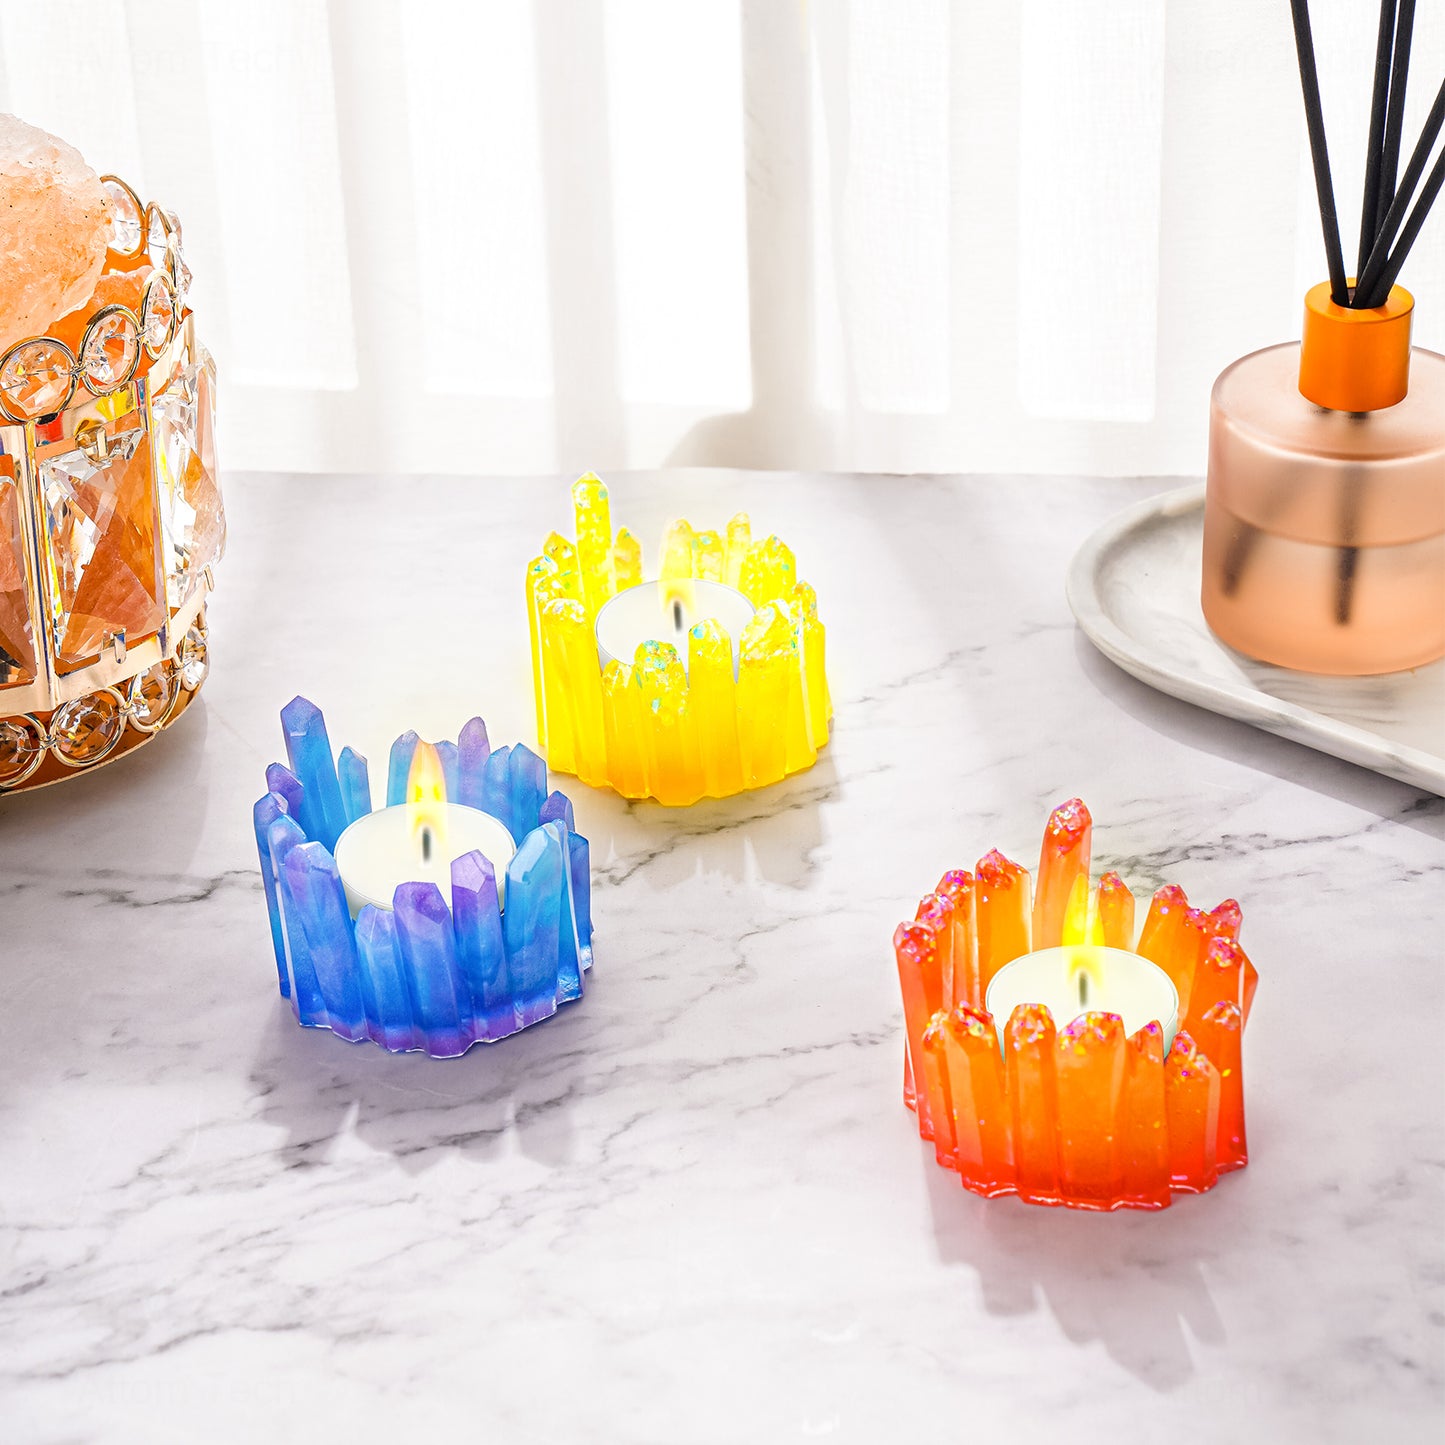 Crystal Shape Candle Holder Resin Silicone Mold+10 White Tealight Candles+Glit